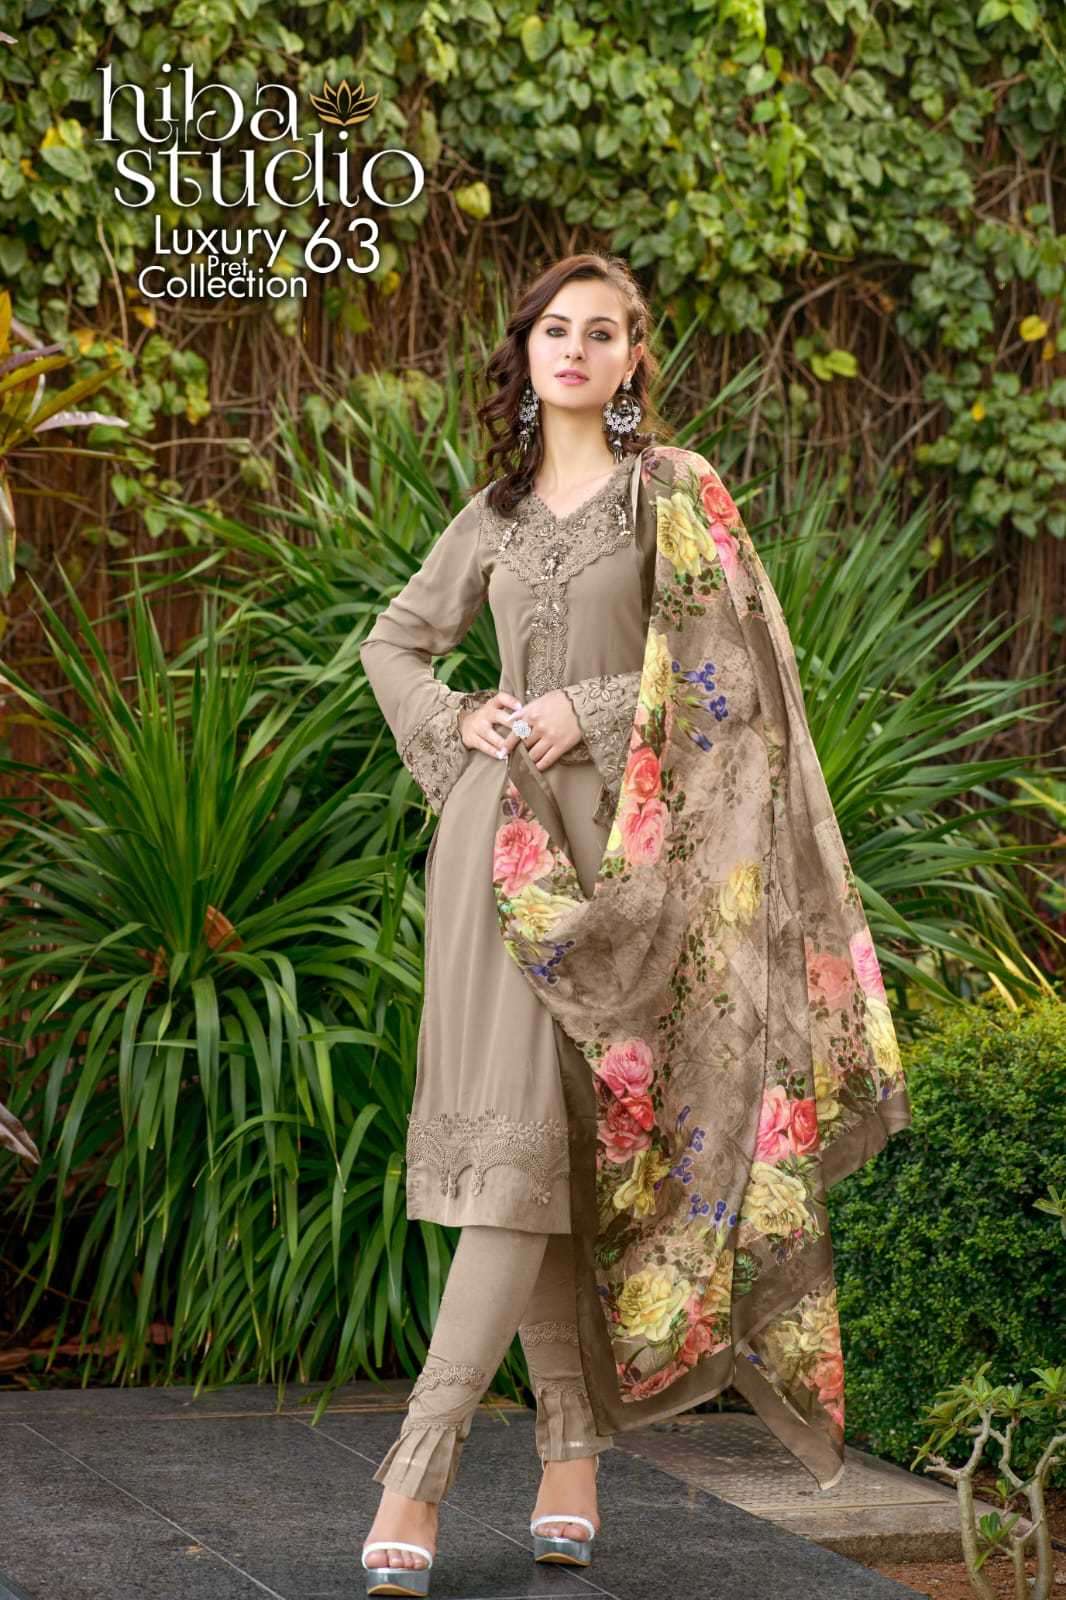 hiba lpc 63 Georgette Fabric tunic is adorned with dainty floral embroideries 